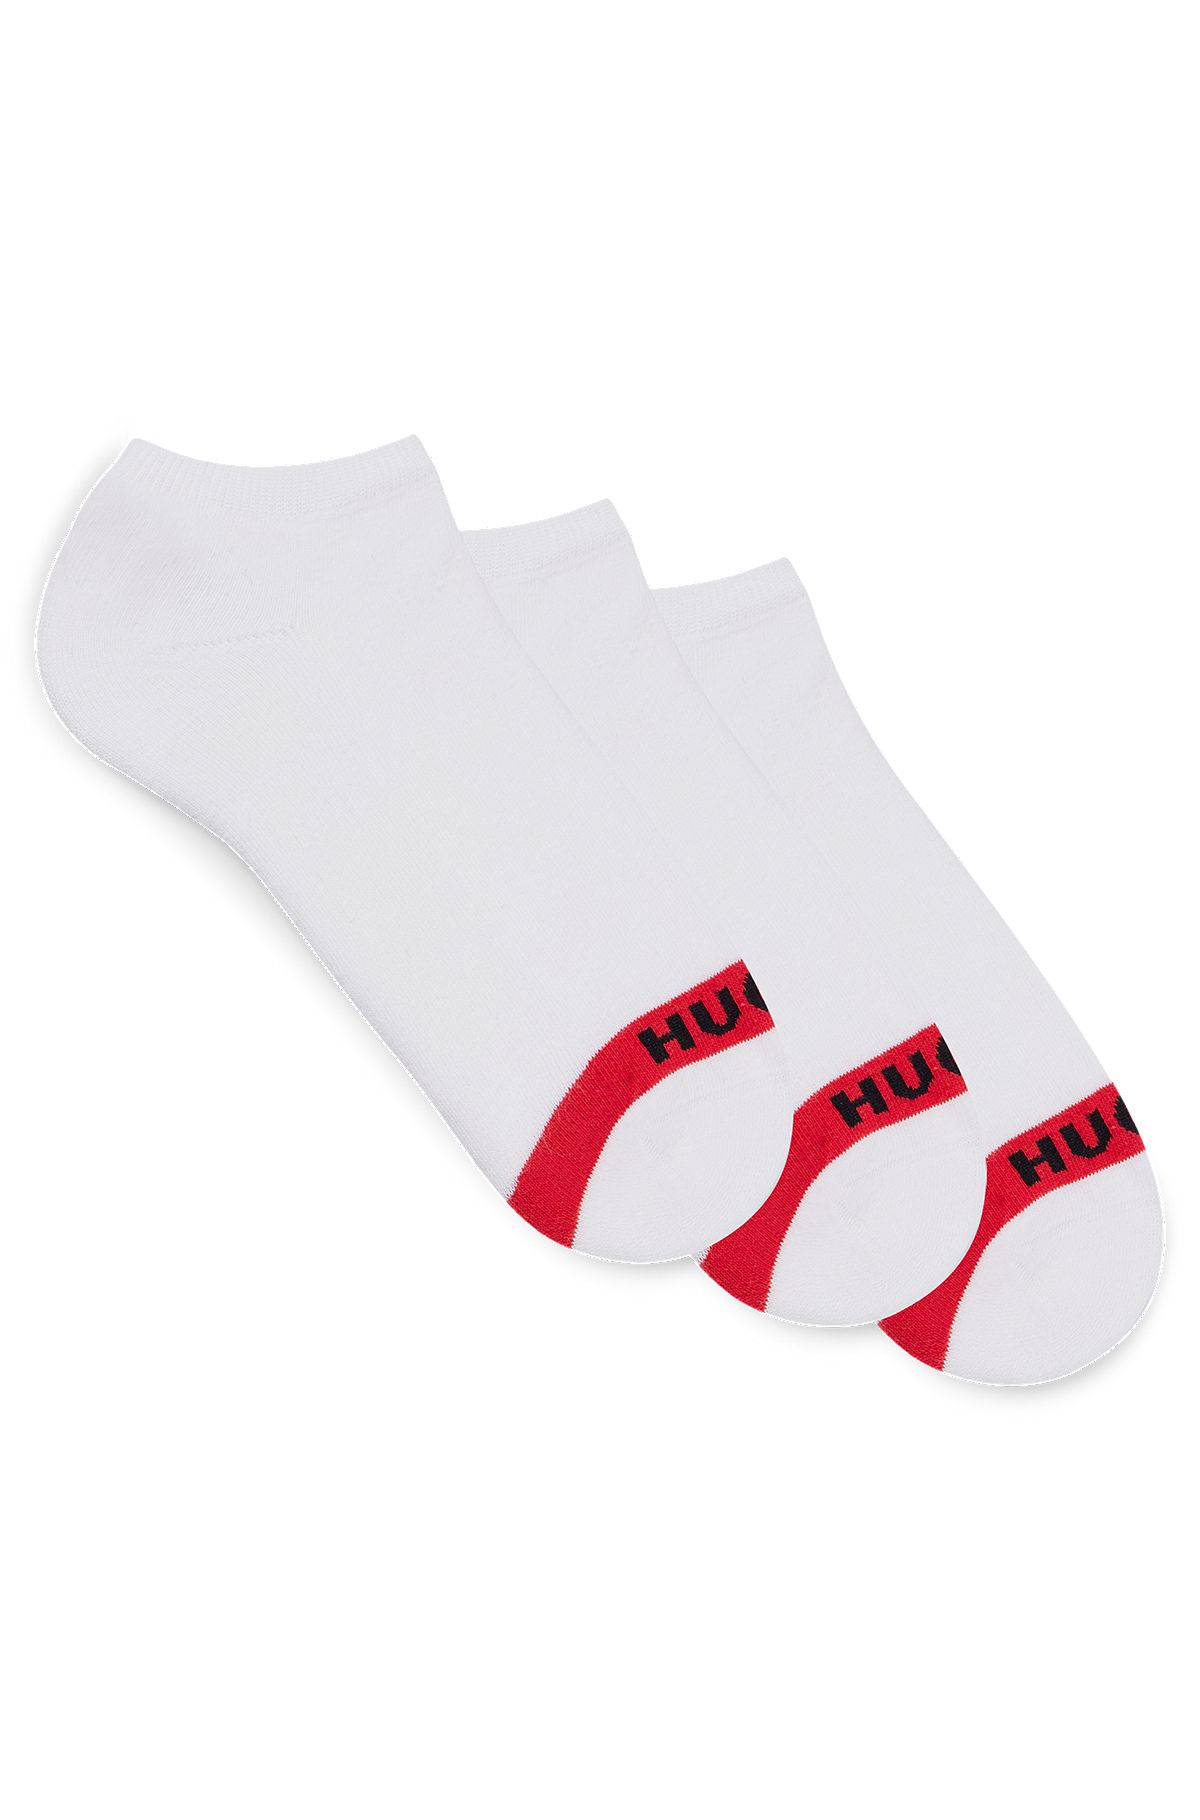 Three-pack of invisible socks with logo details, White